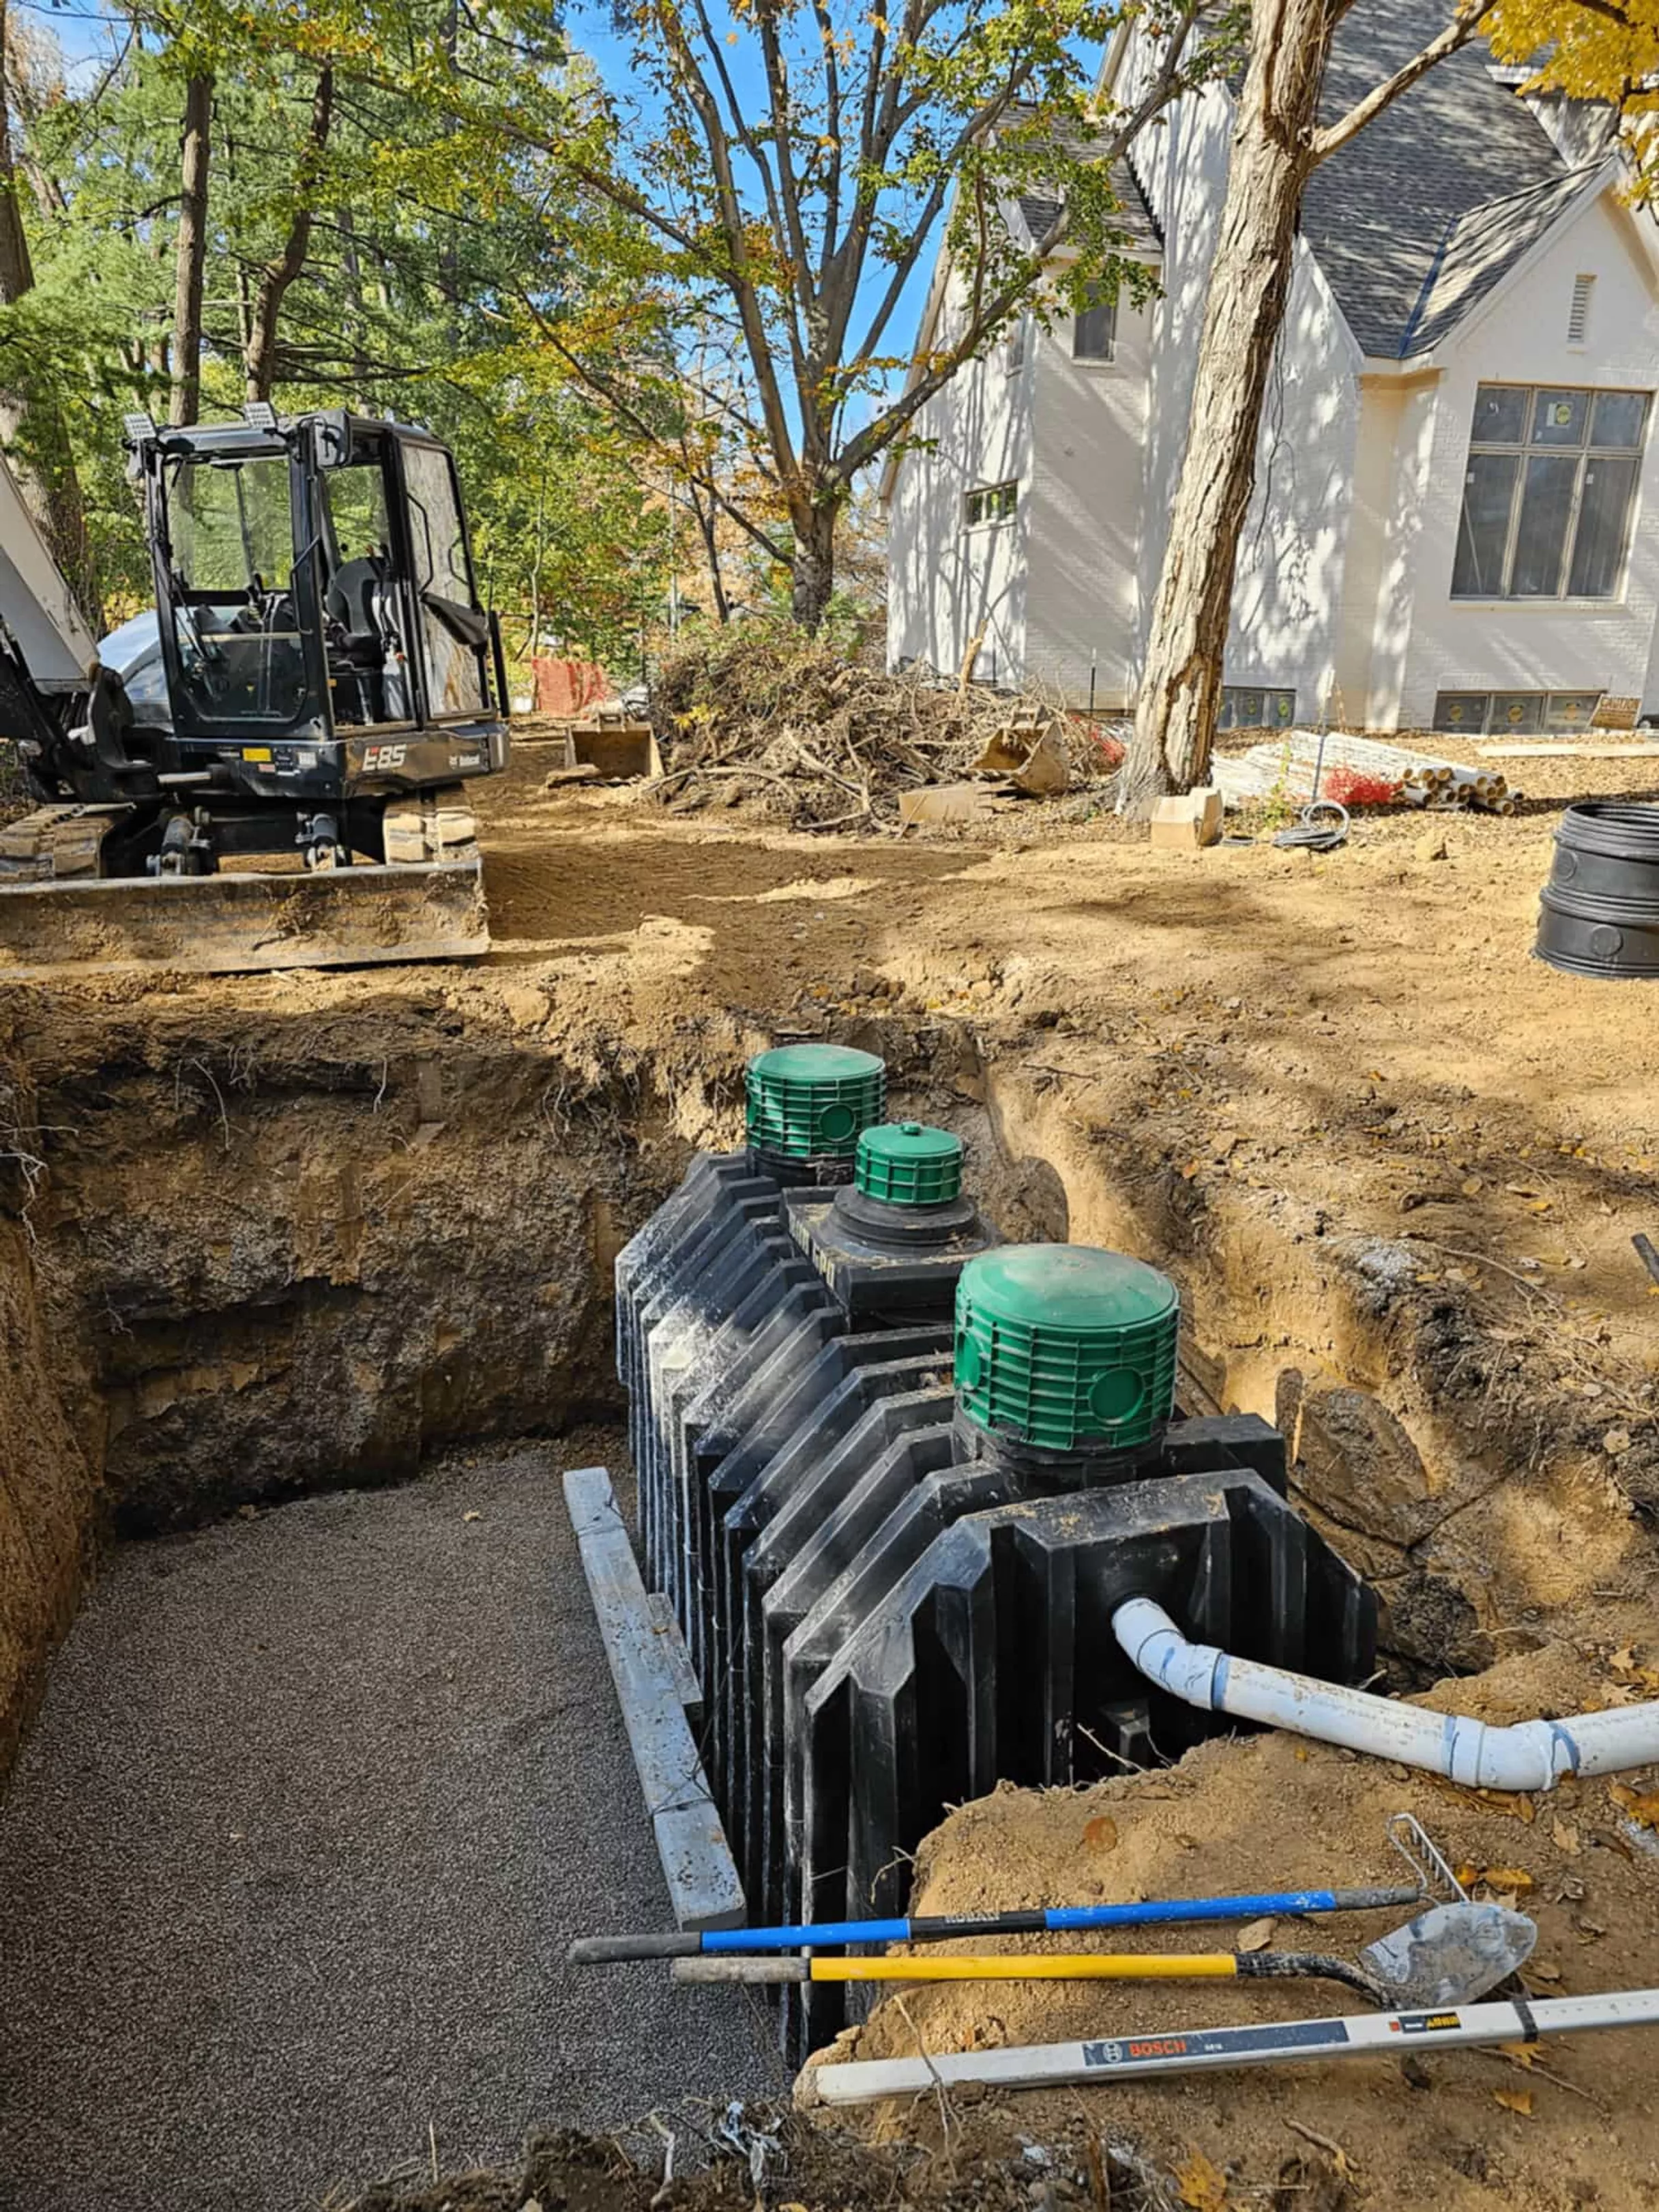 A septic system installation in progress.